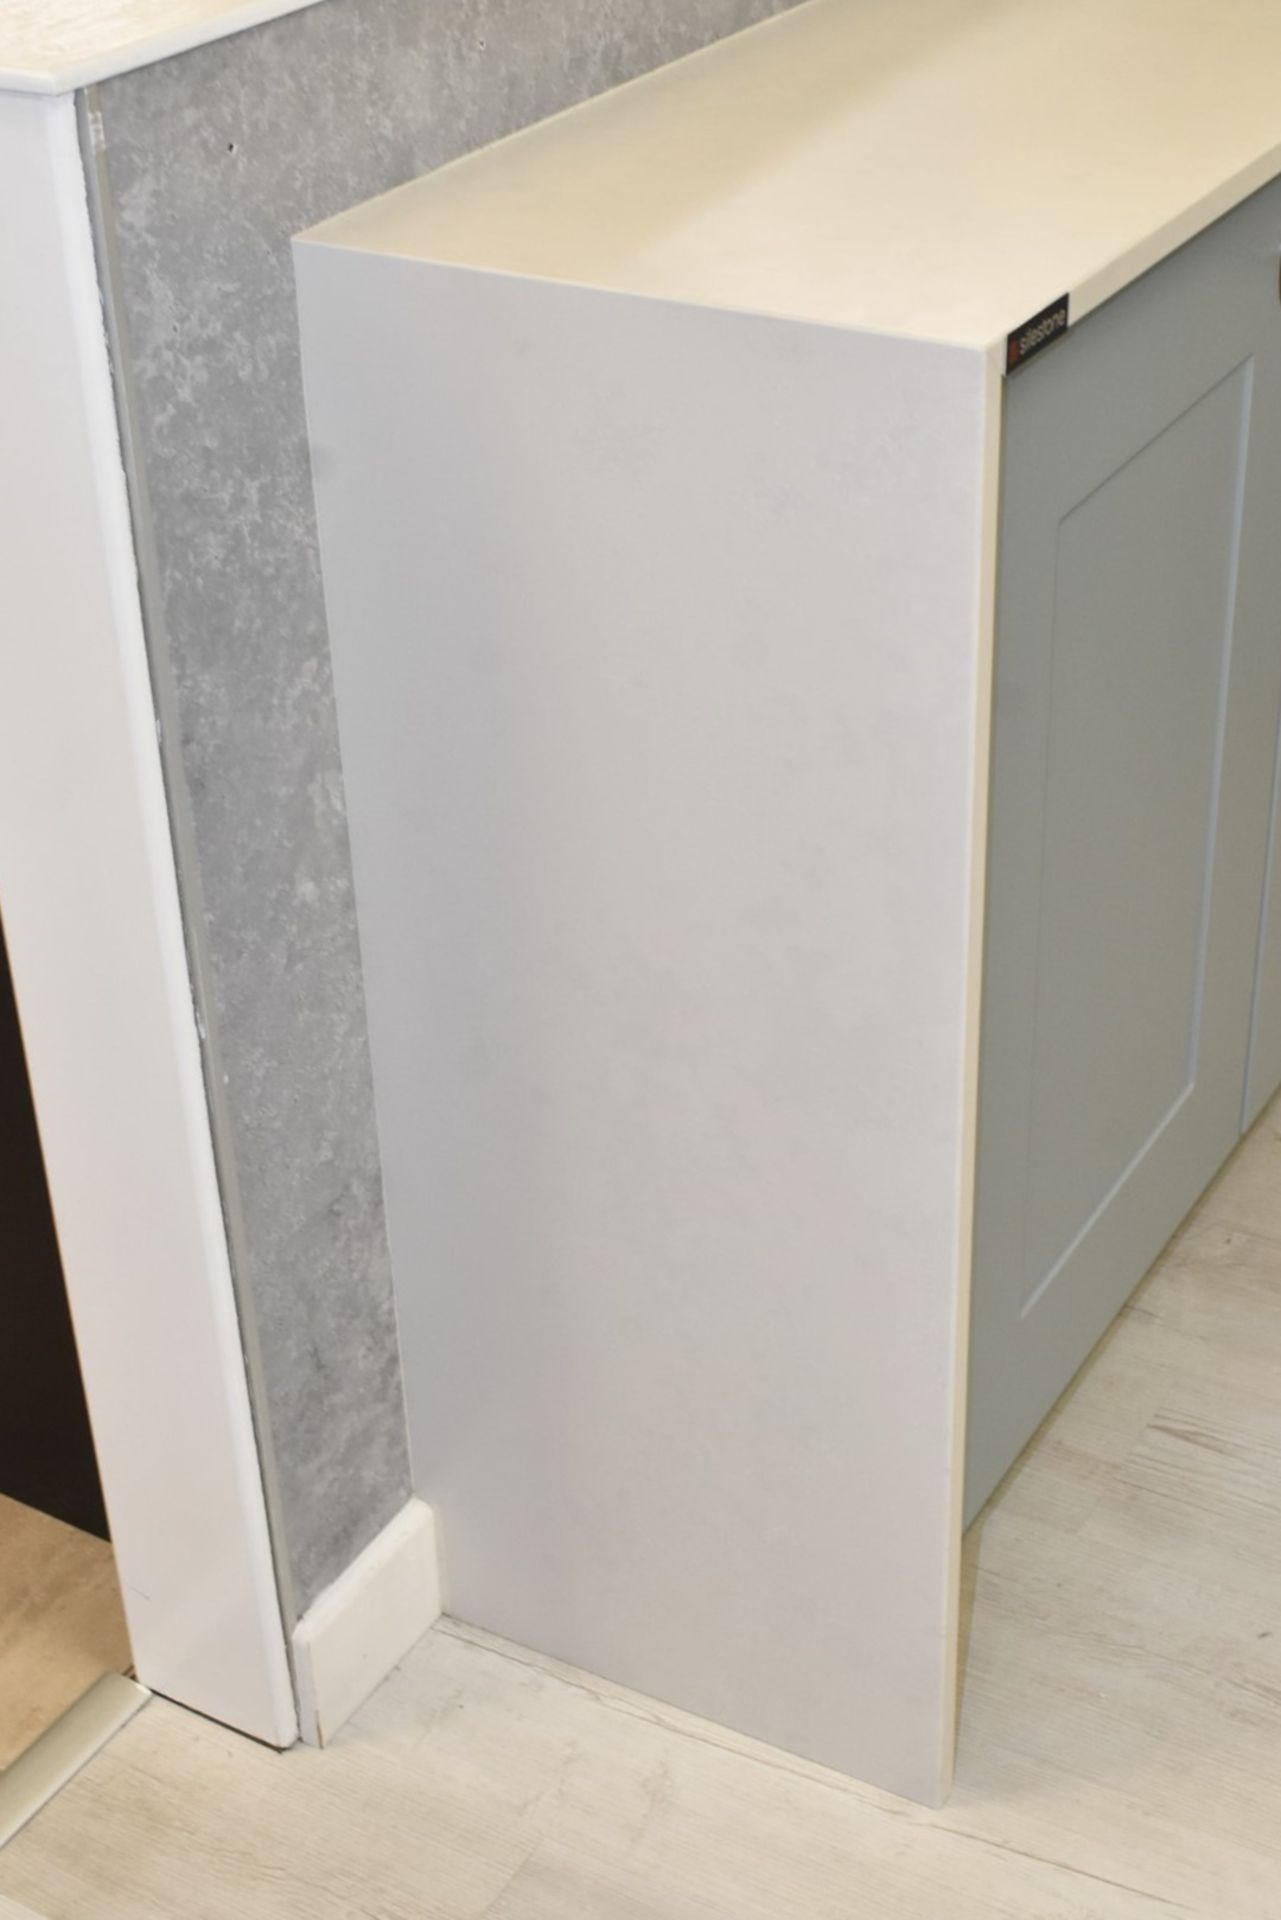 1 x Four Door Cabinet With a Light Grey Finish, Shaker Style Doors and a Silestone Worktop - Image 4 of 10